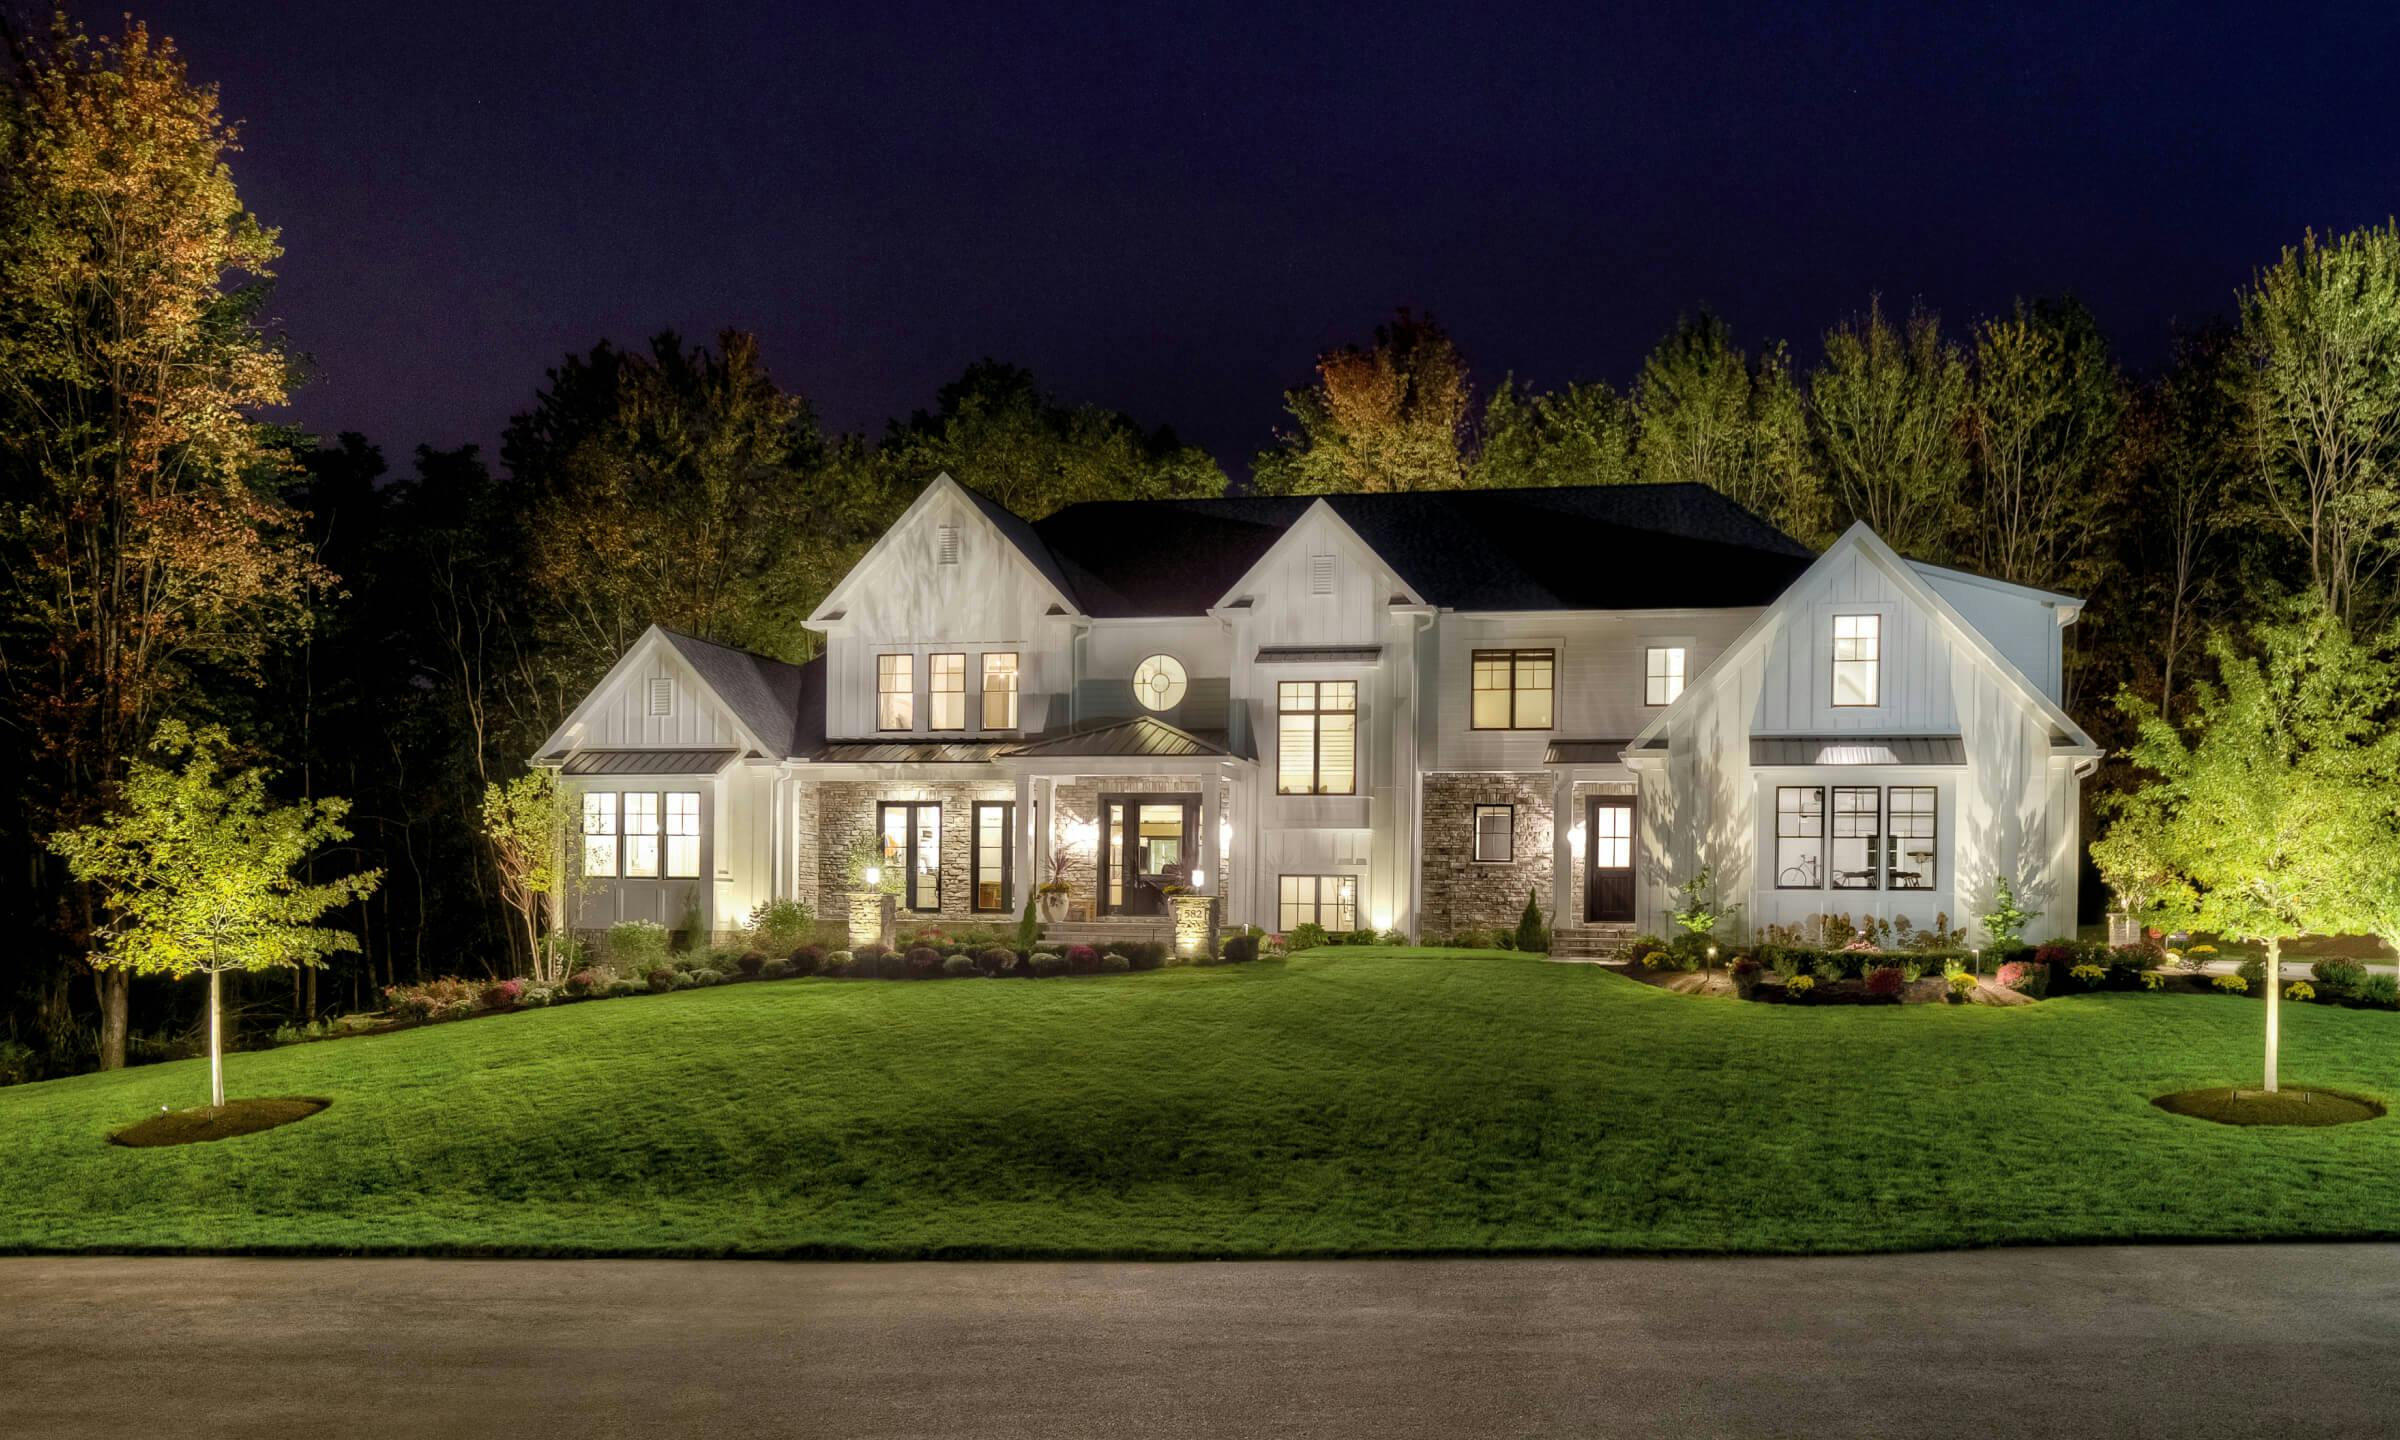 Exterior image of the front a modern farm house lit with landscape lighting, tree lights, and exterior lights at night 